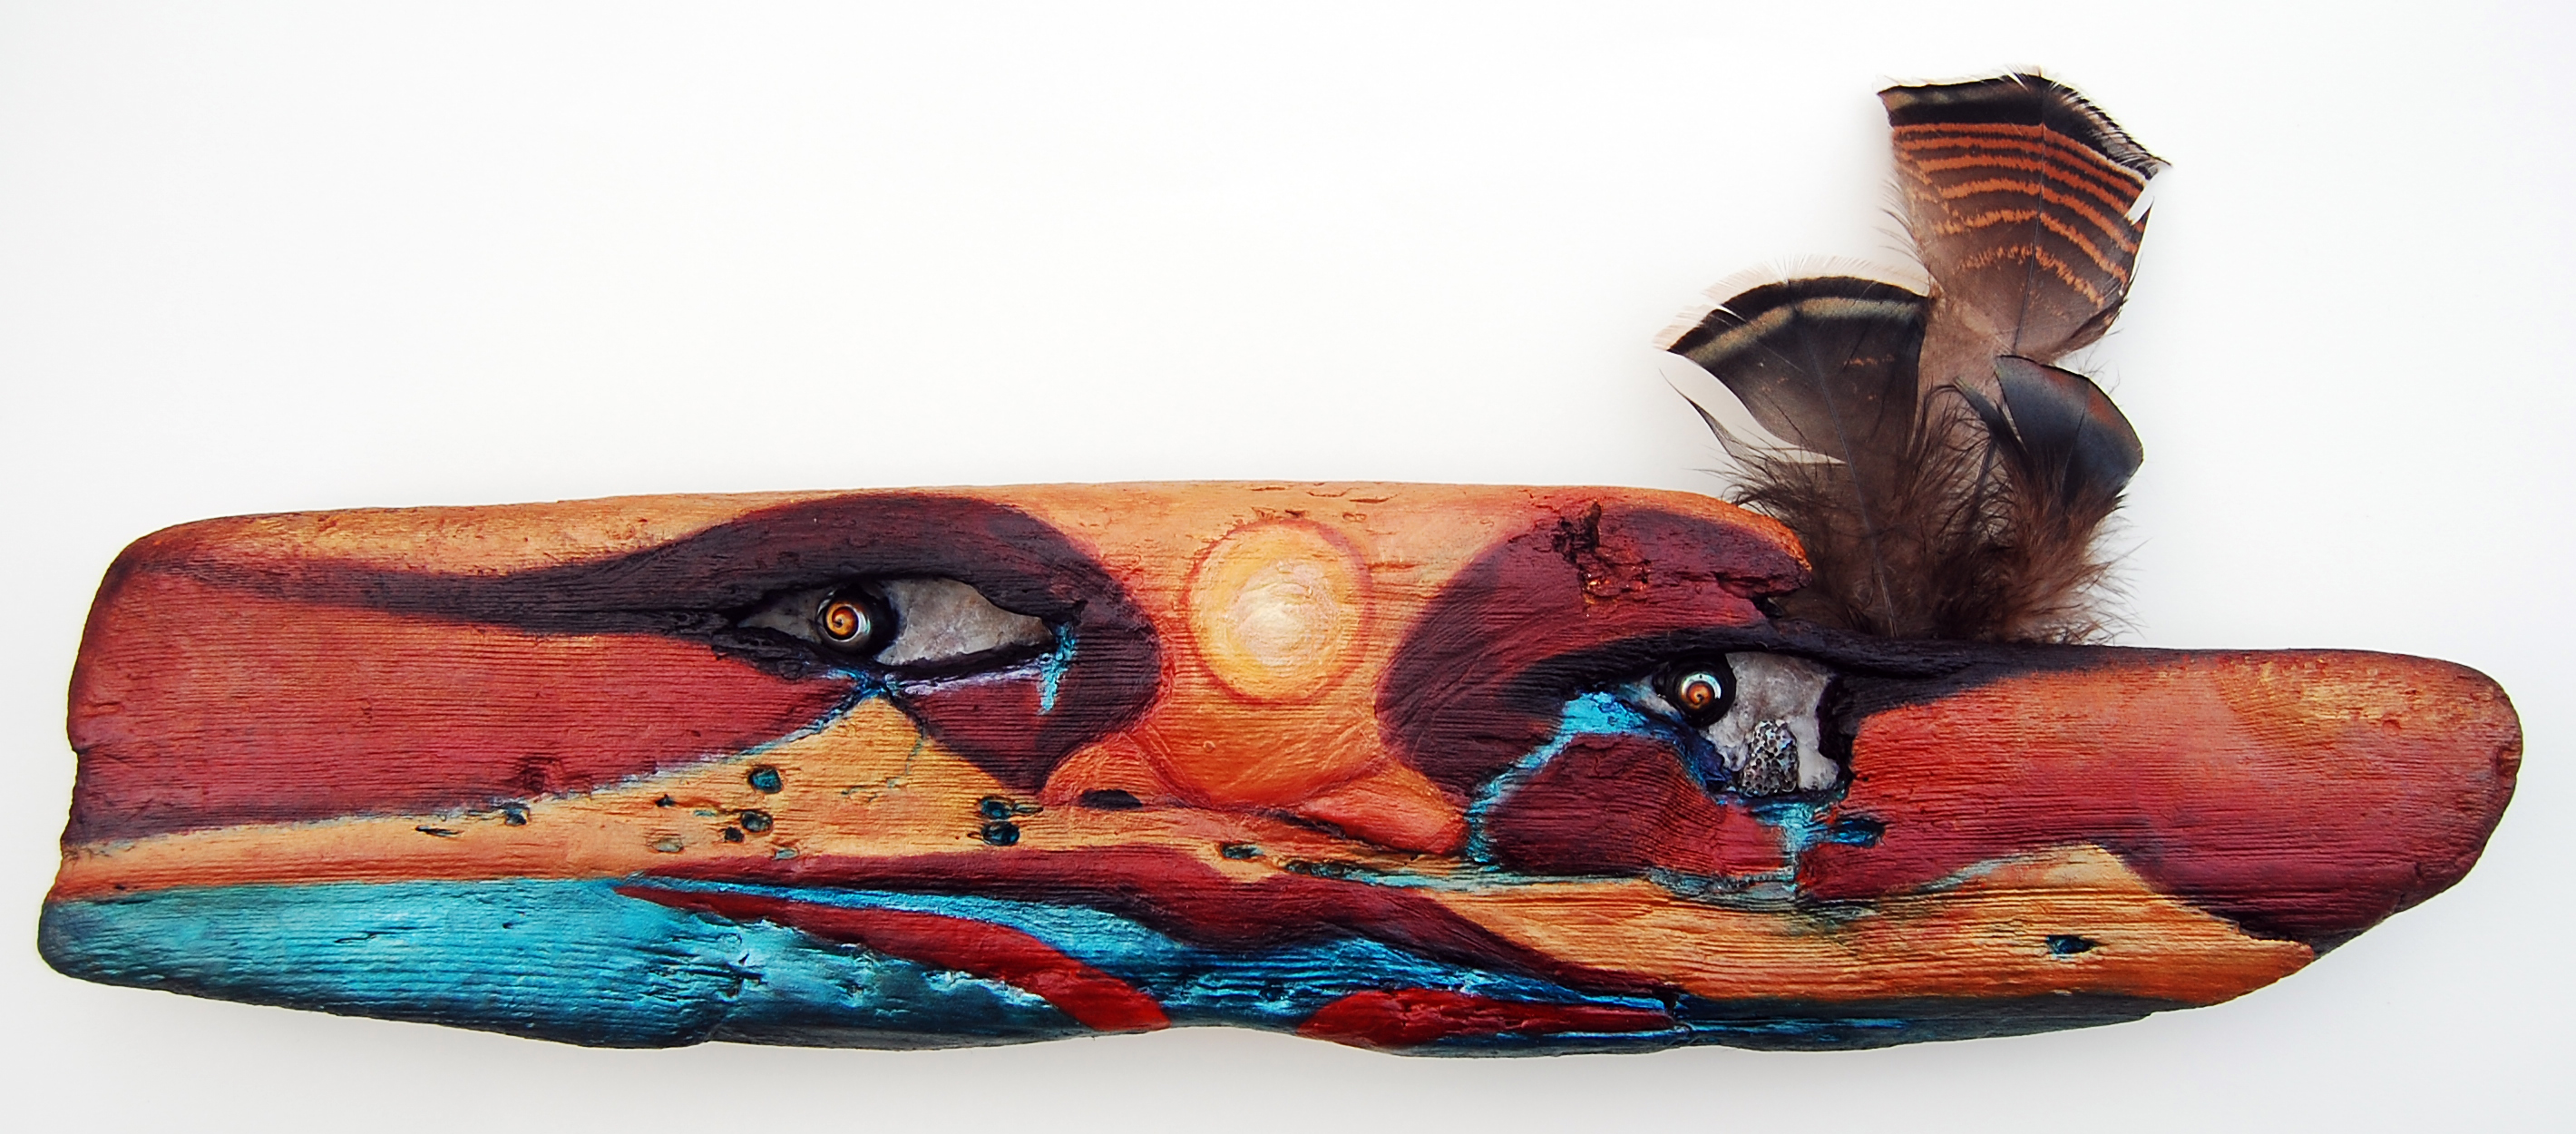 Watershed (Ohlone Tears), 2012, Oil, shell, abalone, beeswax, driftwood, 9"h x 21"w, Eleanor Ruckman